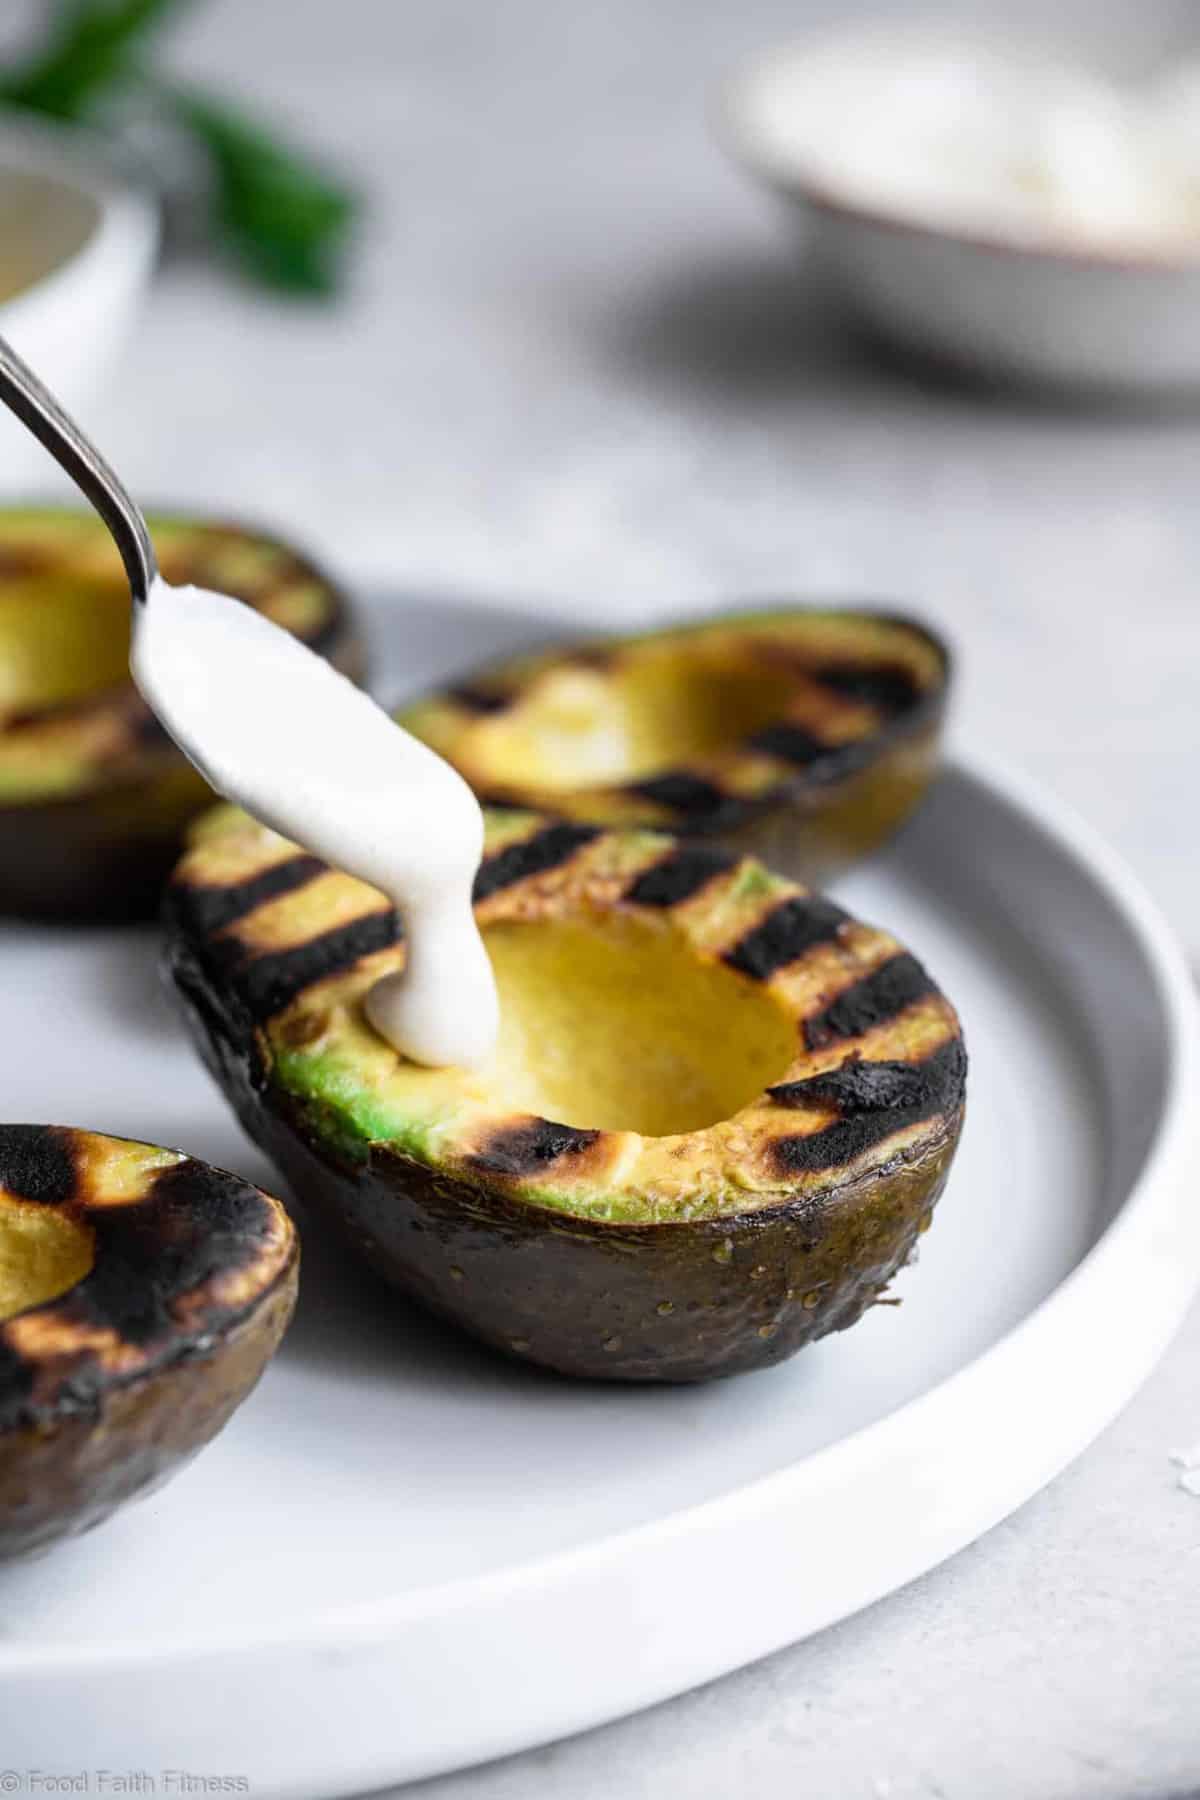 Grilled Avocado with Feta Tahini Sauce - These smoky and creamy grilled avocados are drizzled with a sweet and tangy feta and tahini sauce for an easy summer dinner that's healthy , keto, low carb and delicious! | #Foodfaithfitness | 